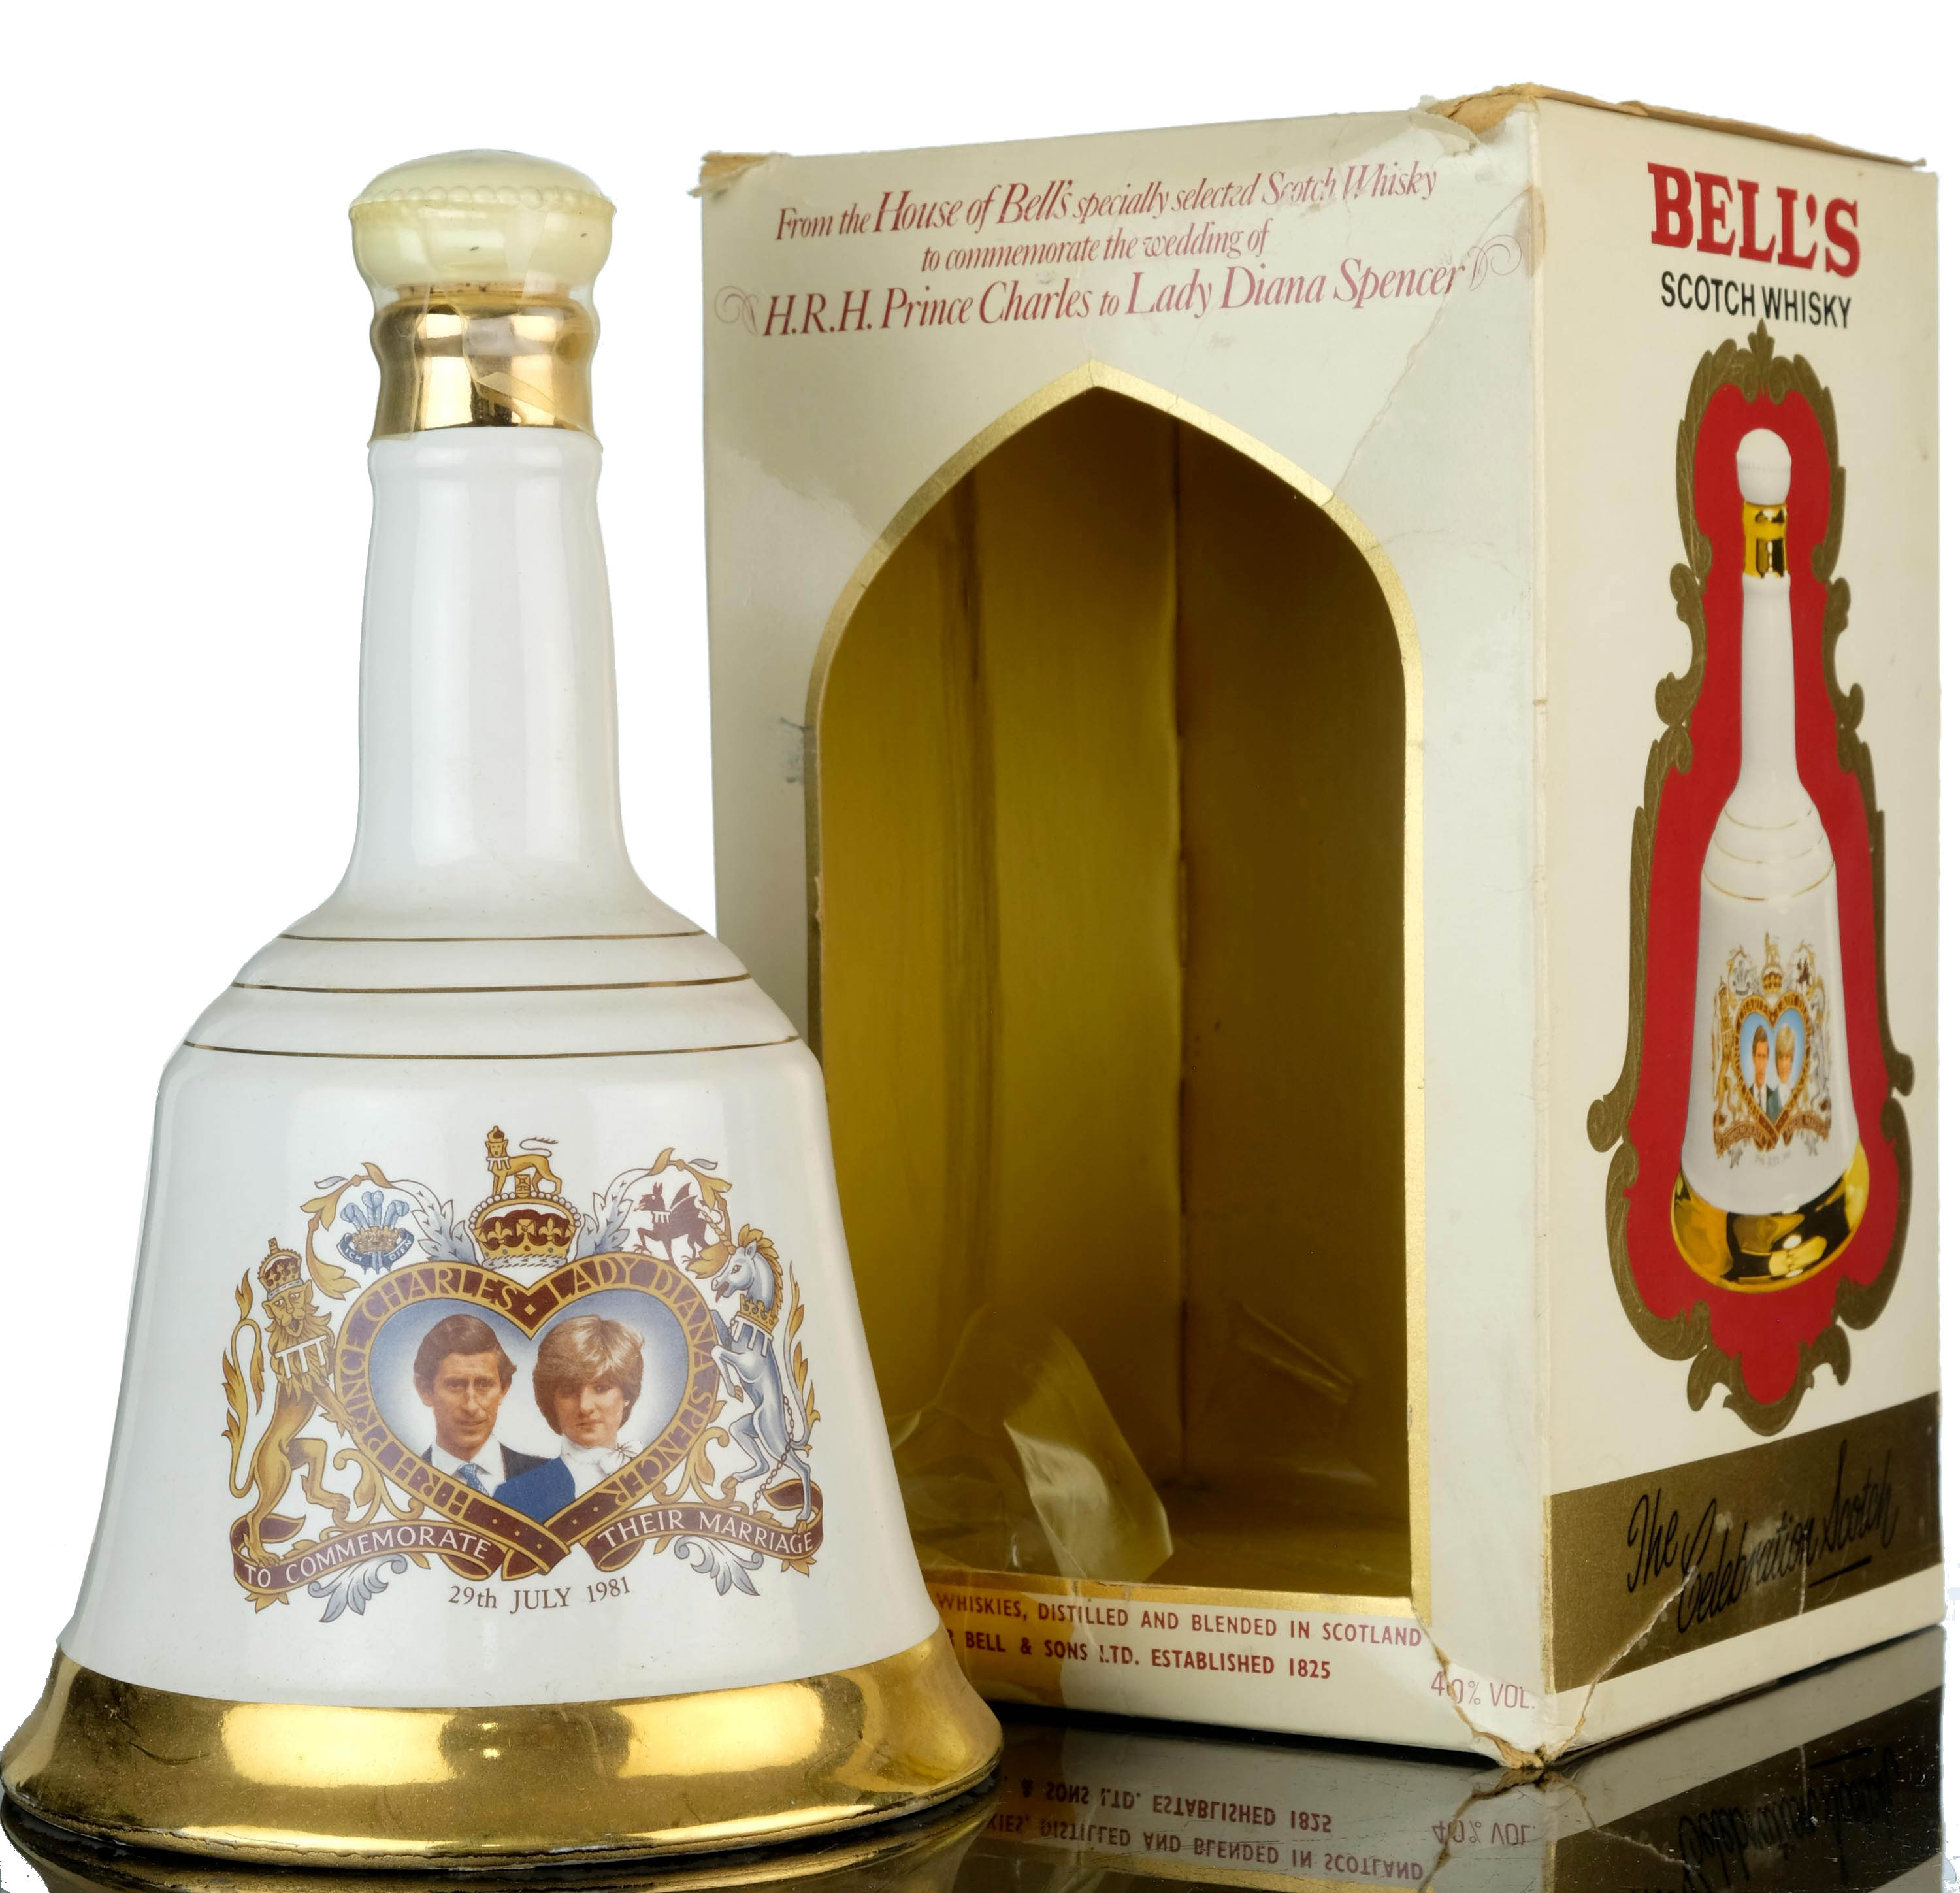 Bells To Commemorate The Marriage Of Prince Charles & Lady Diana